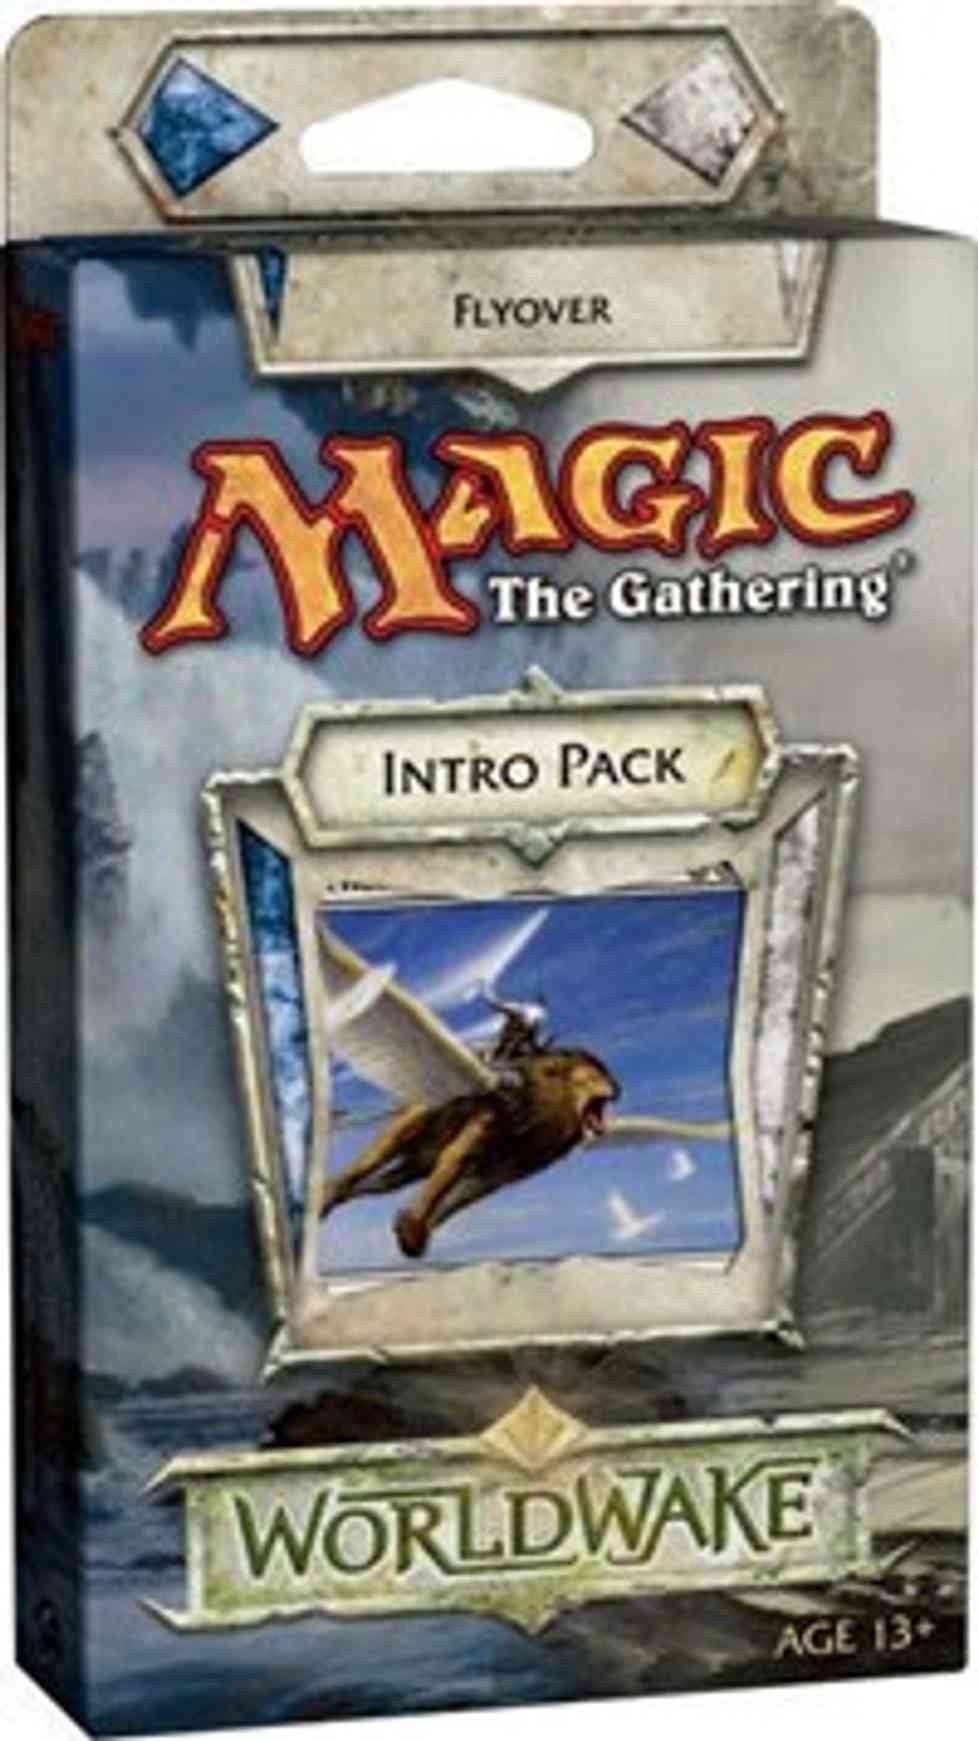 Worldwake Intro Pack - Flyover magic card front